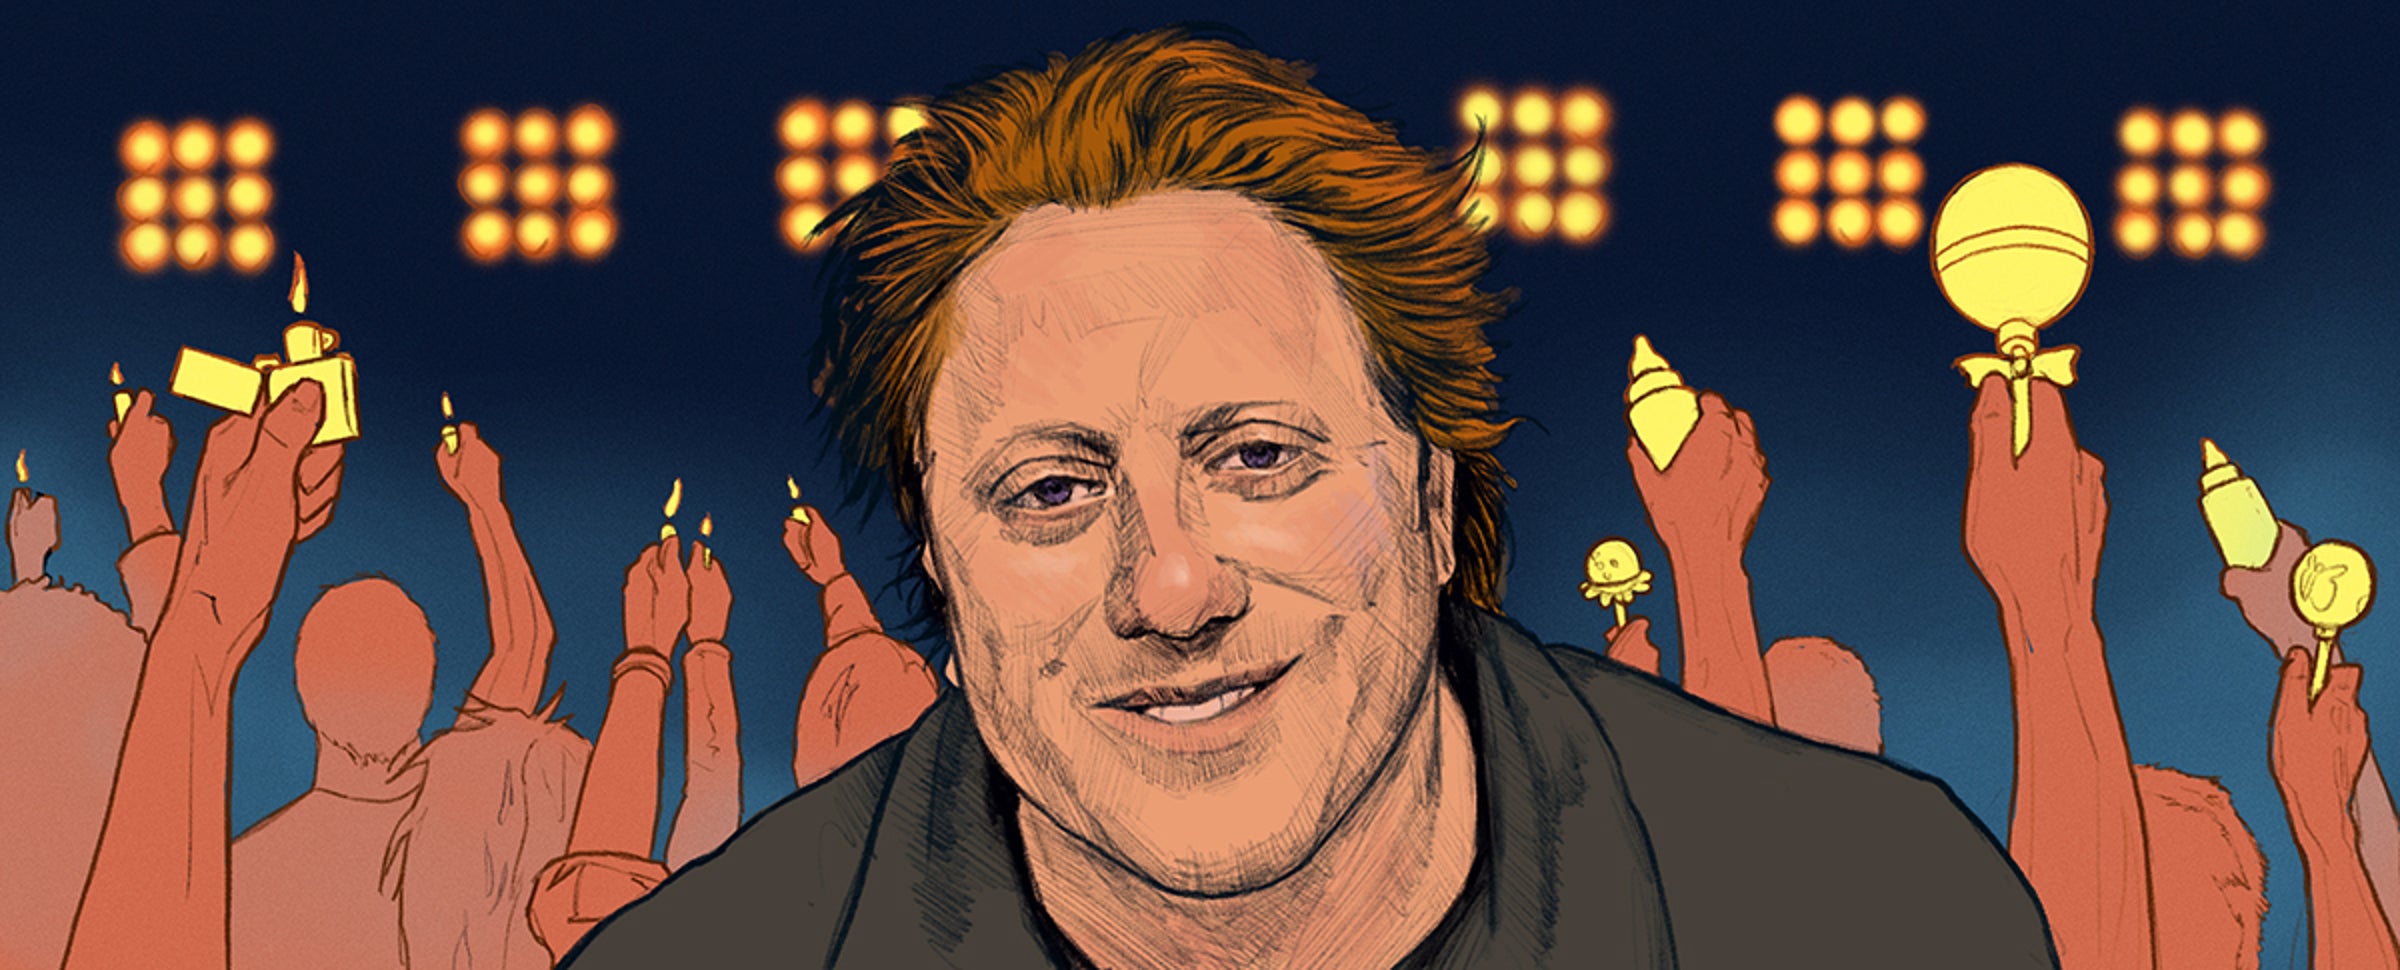 Peter Shapiro’s Rock and Roll Playhouse is Ensuring Live Music’s Future